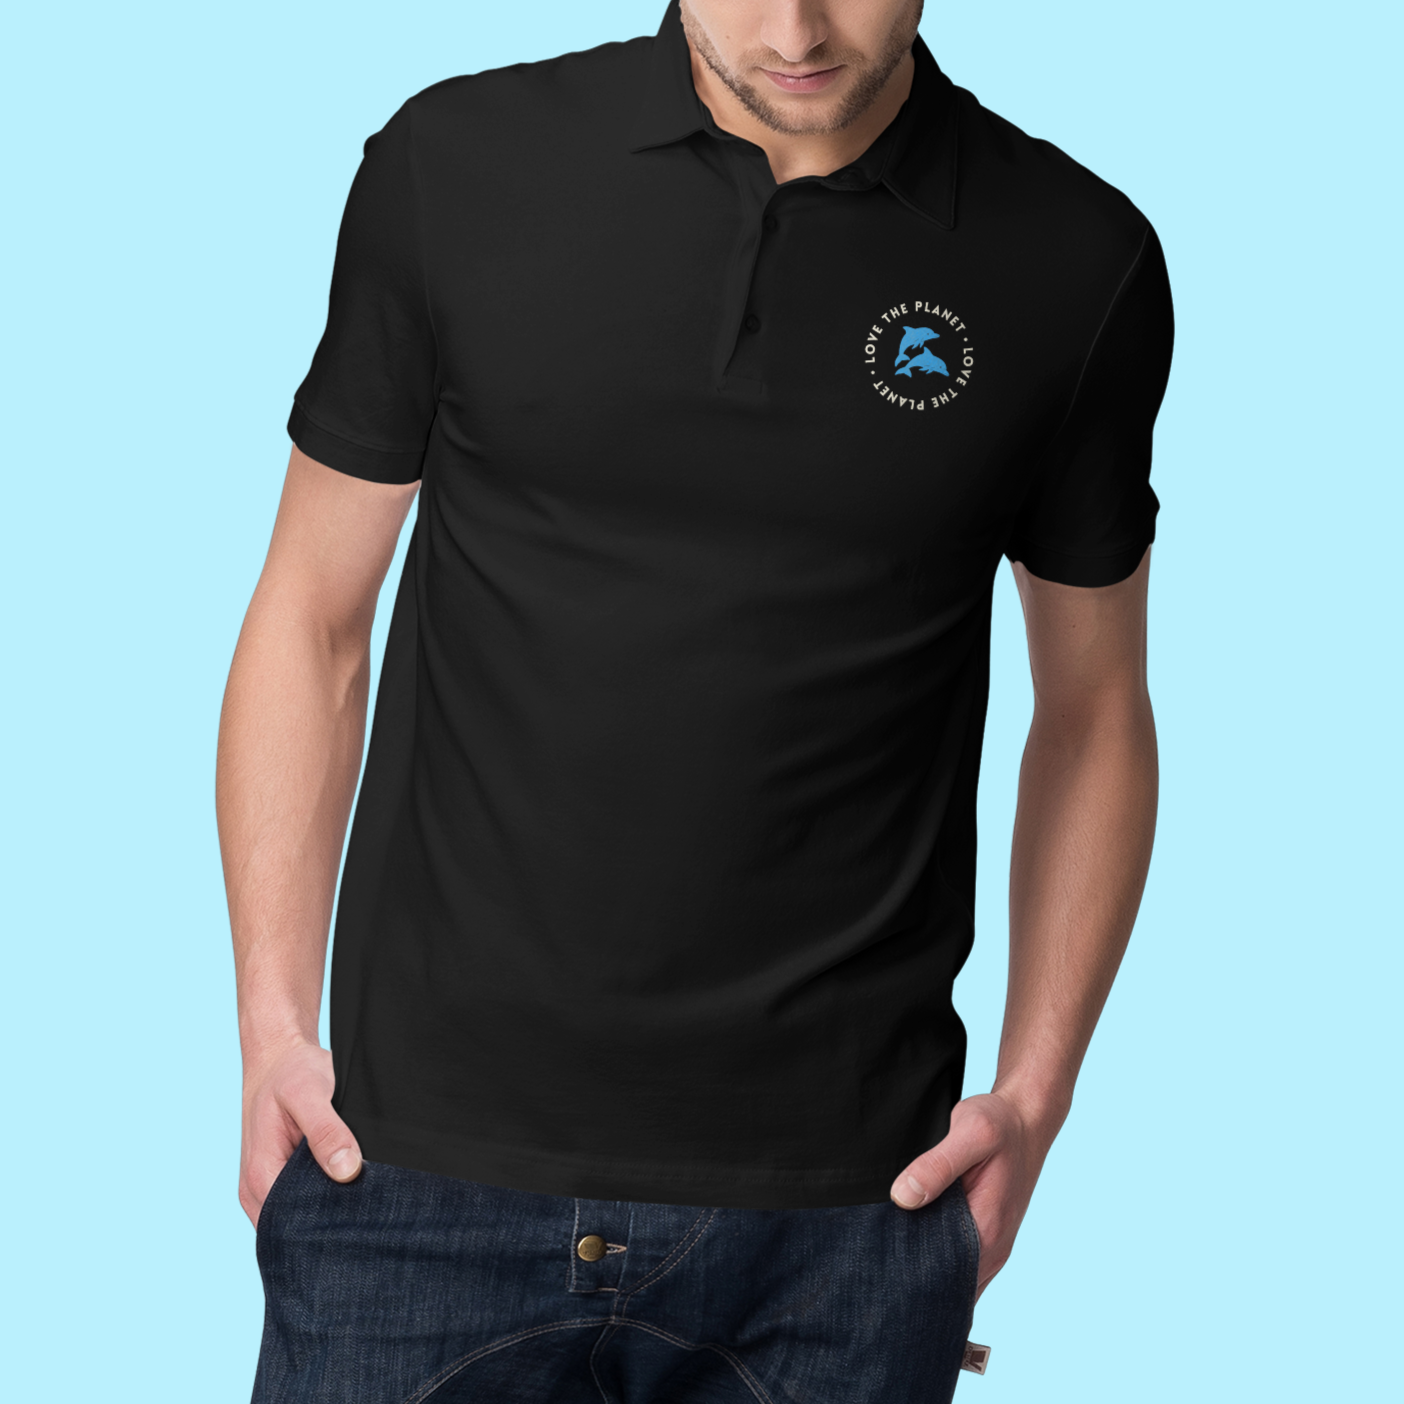 Premium Cotton Polo T-shirt Black with Love The Planet graphics on pocket area